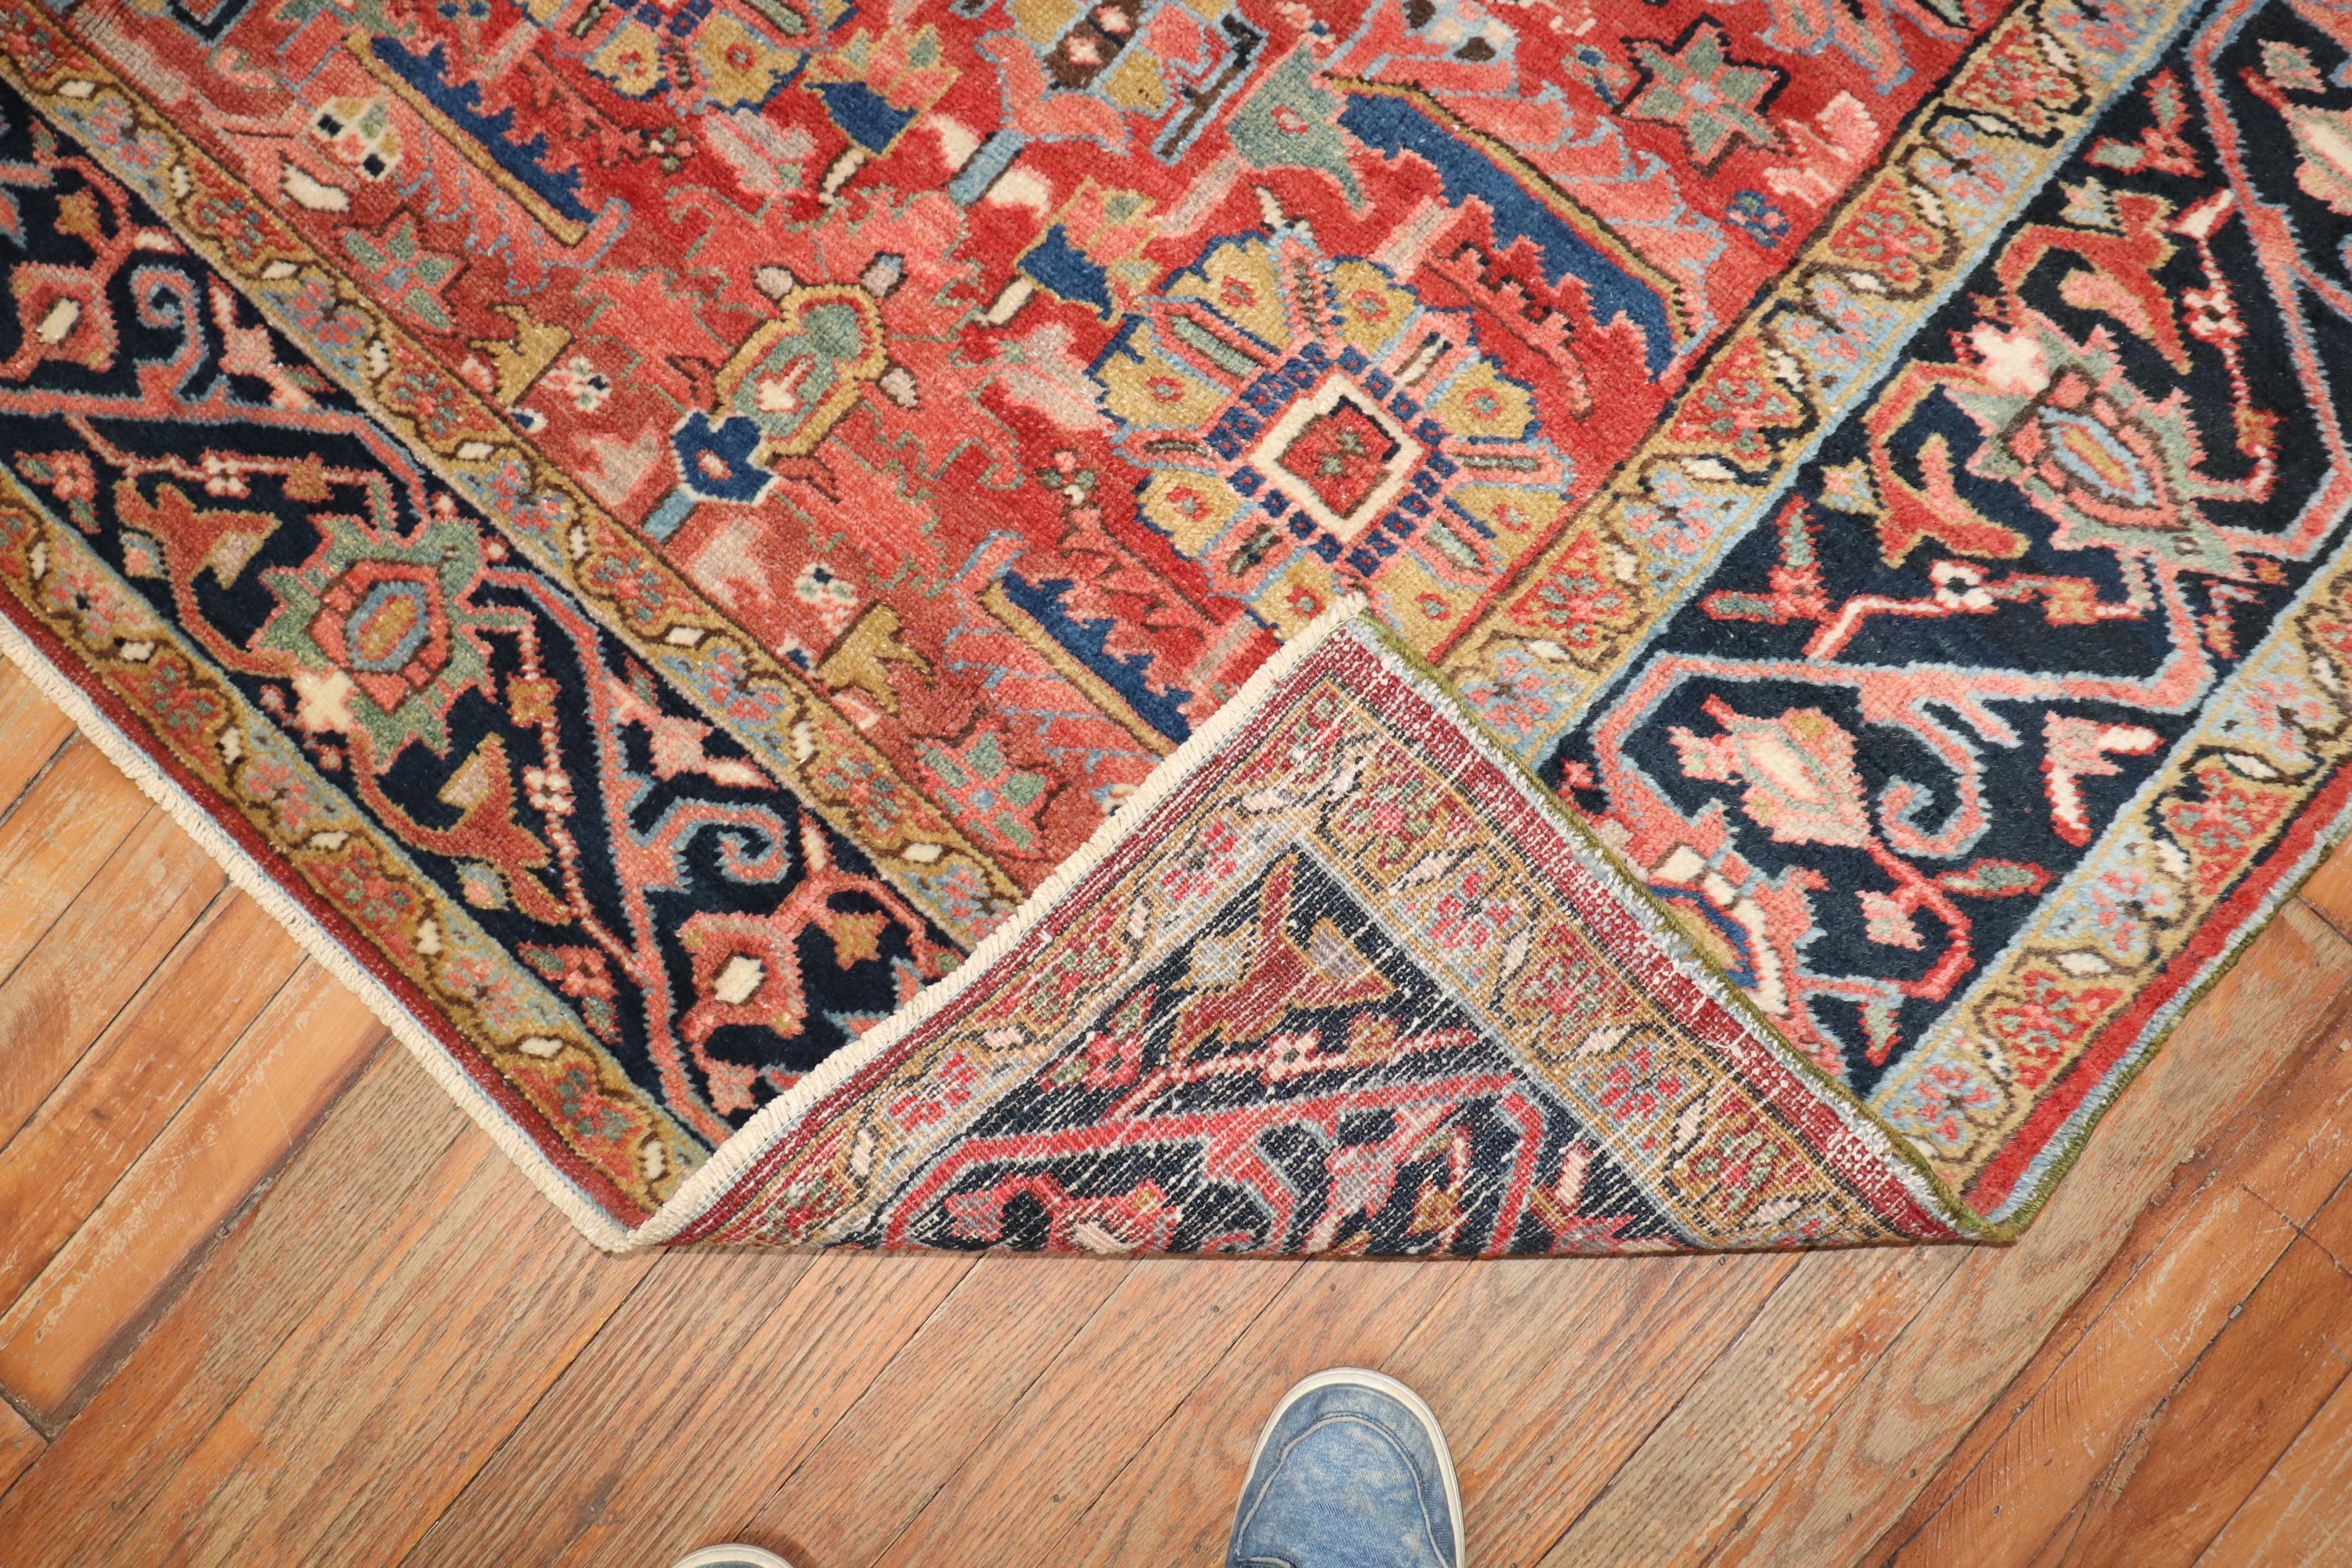 An early 20th-century Persian Heriz room size rug

Measures: 7'8'' x 11'2''.